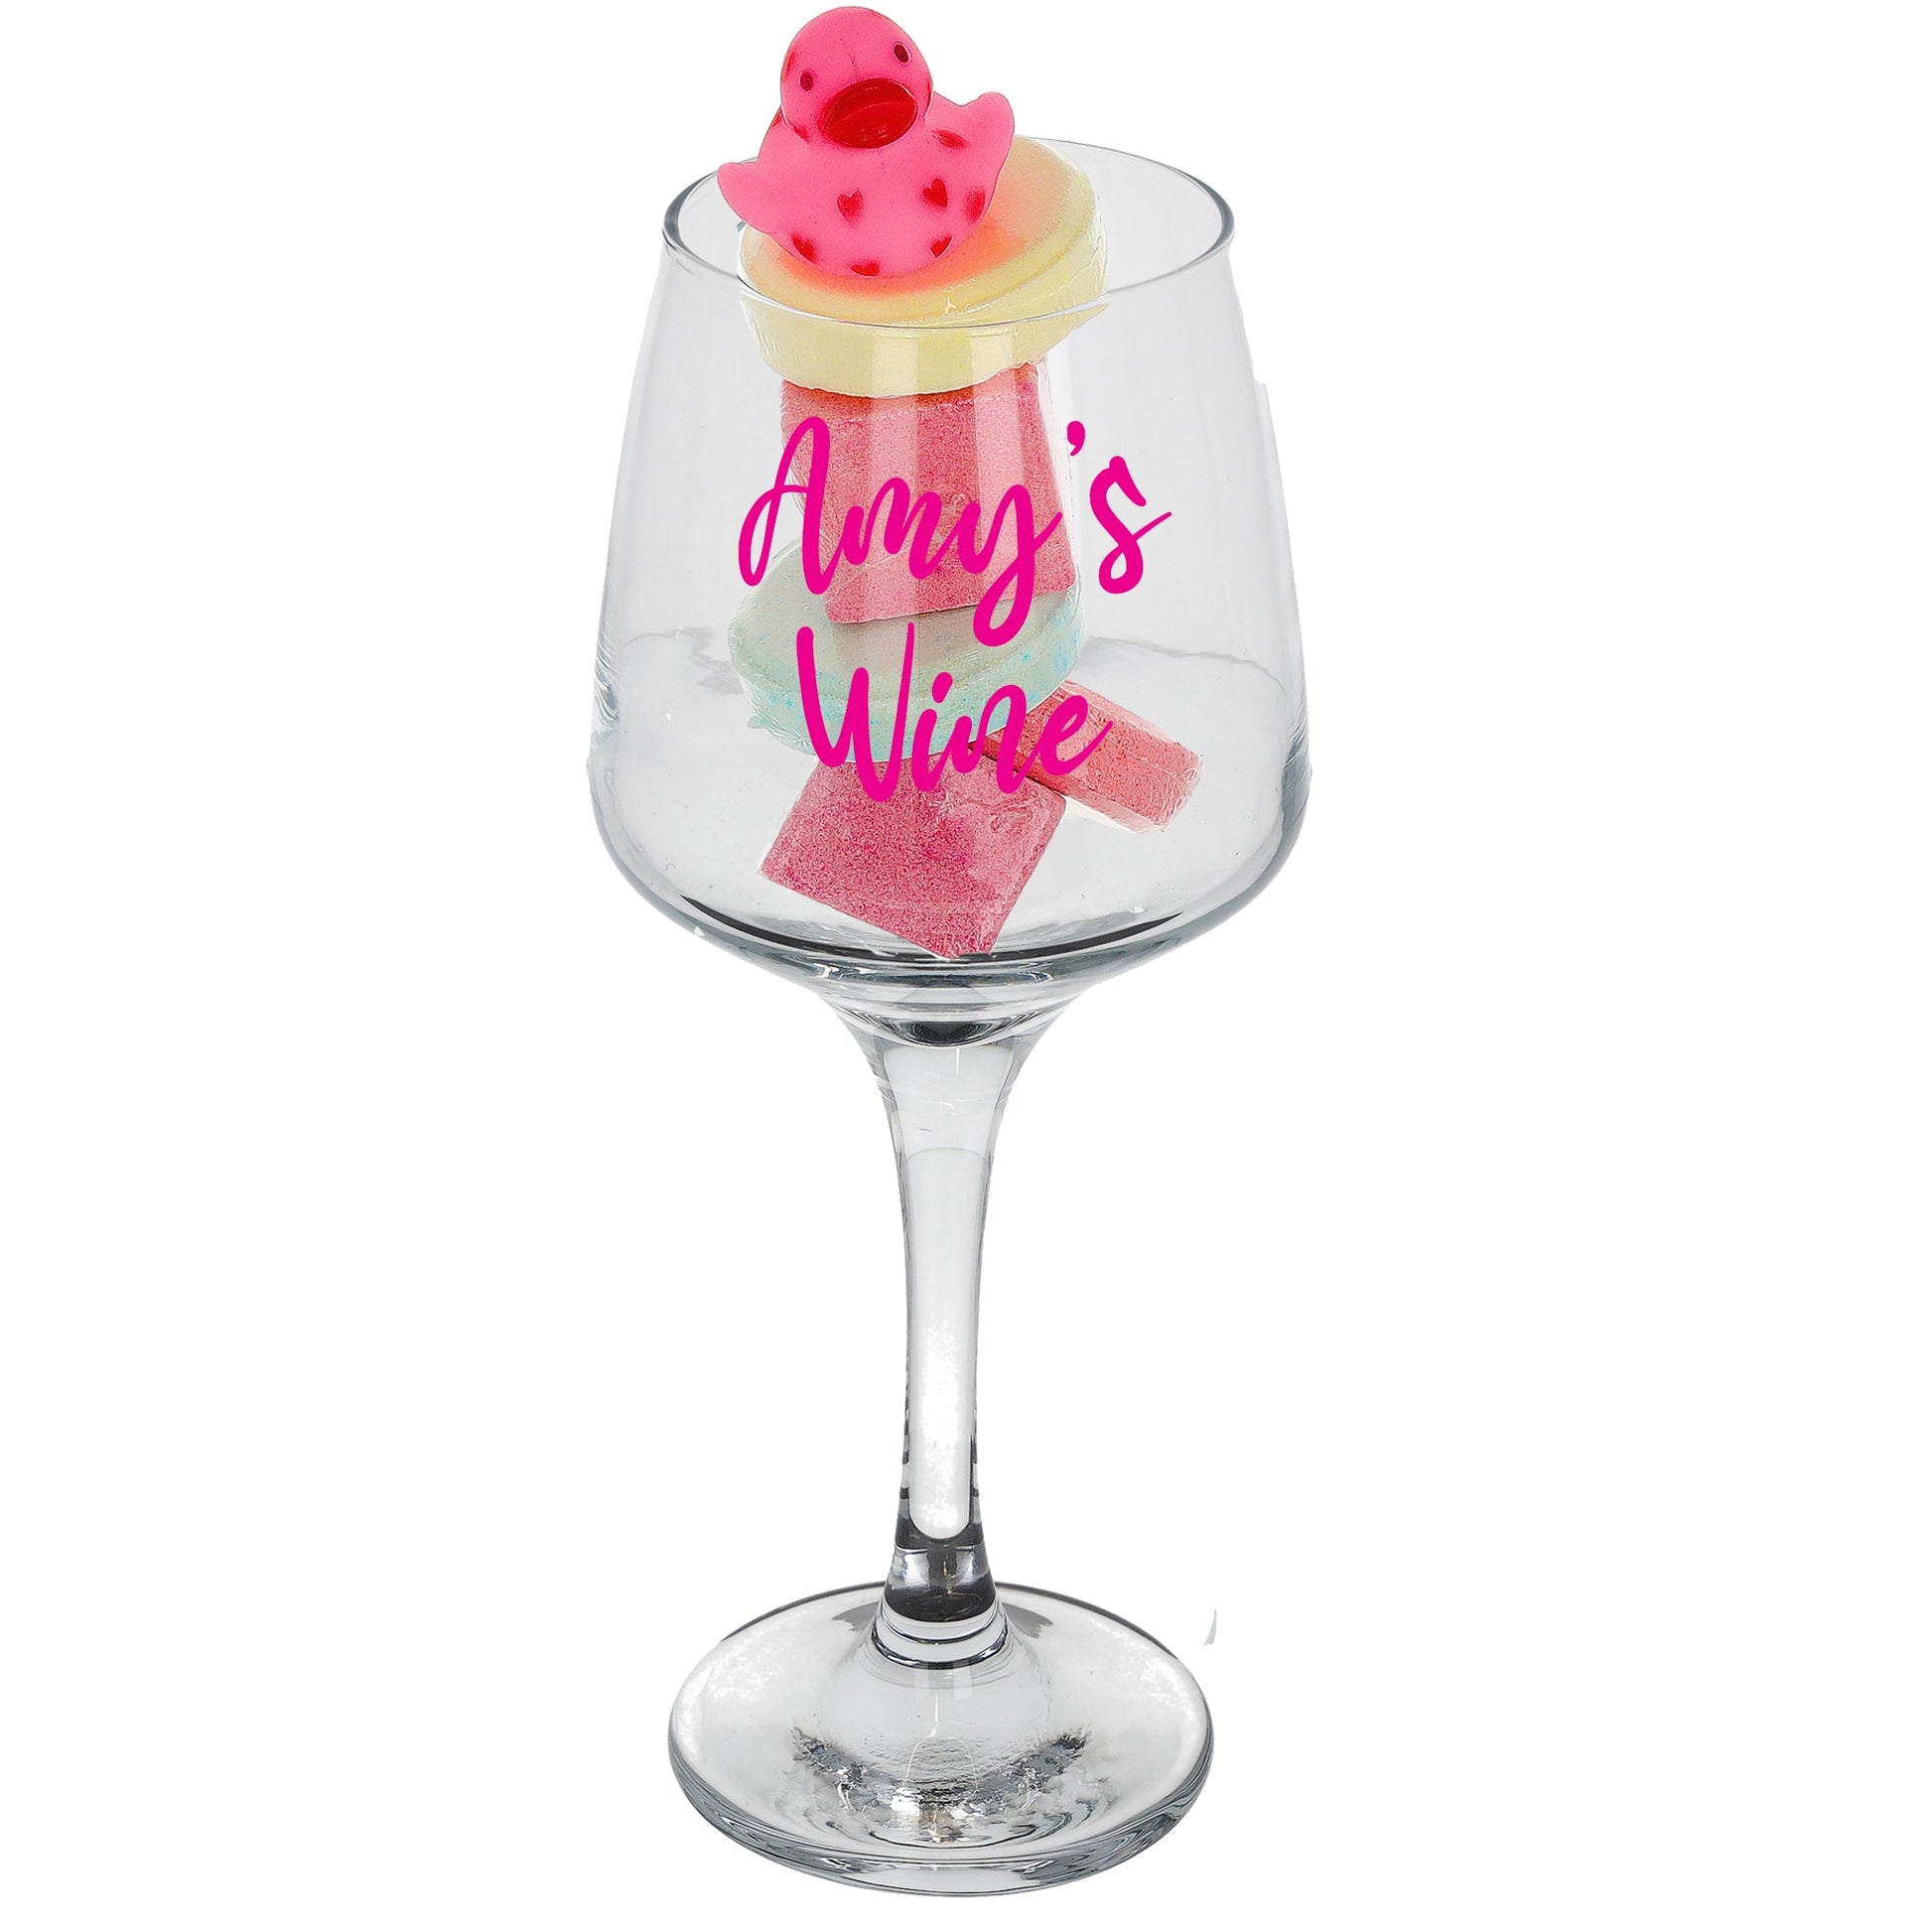 Mother's Day Personalised Wine Glass Bath Time Pamper Fun Set  - Always Looking Good -   